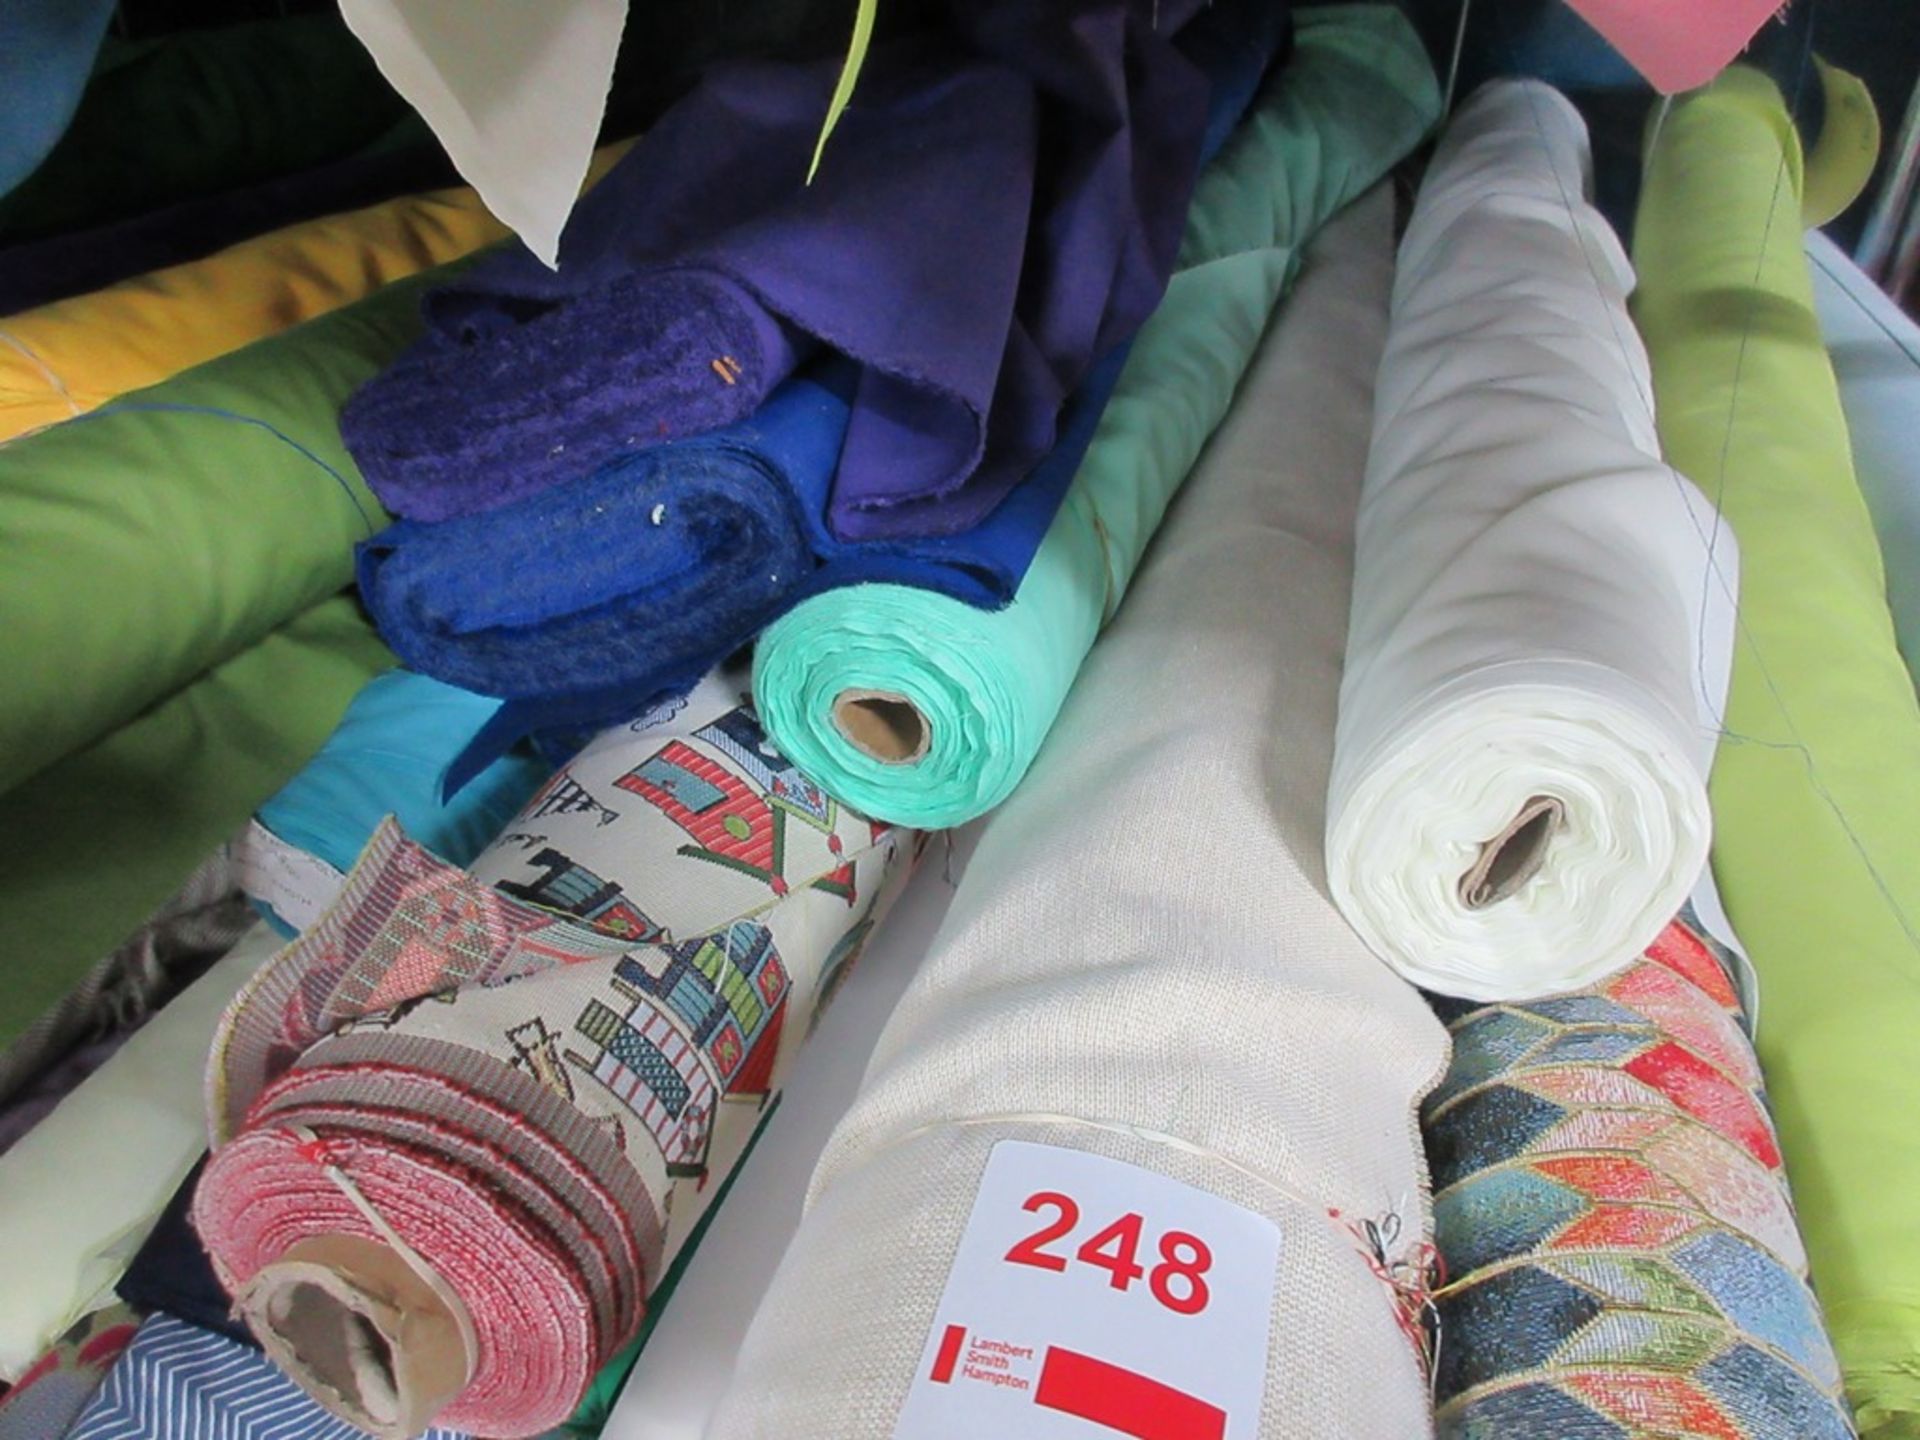 Quantity of part rolls materials for blinds/ curtains